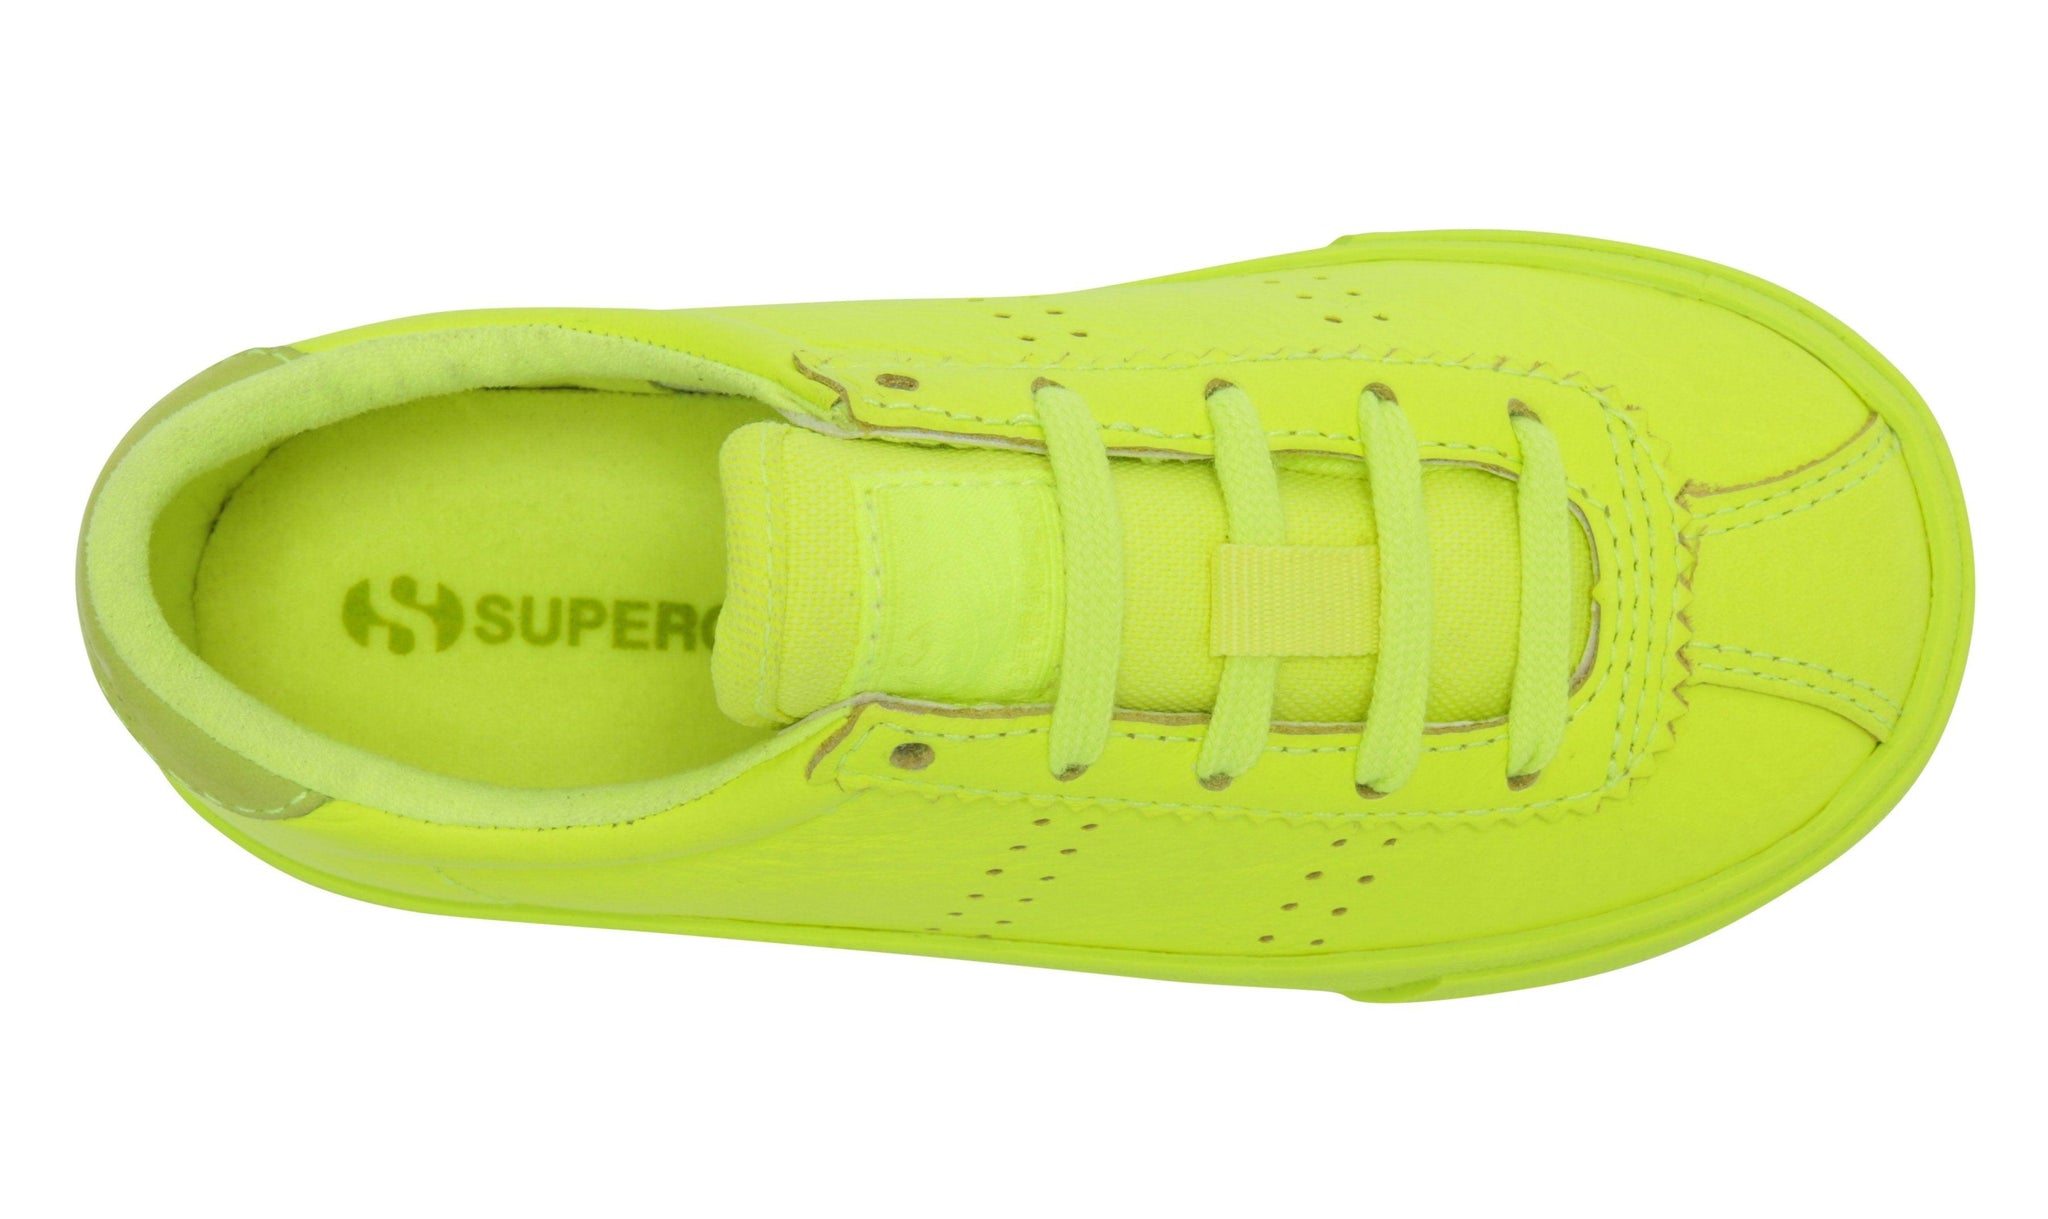 Superga 2843 Clubs Comfleau Total Yellow Fluo - Uncommon